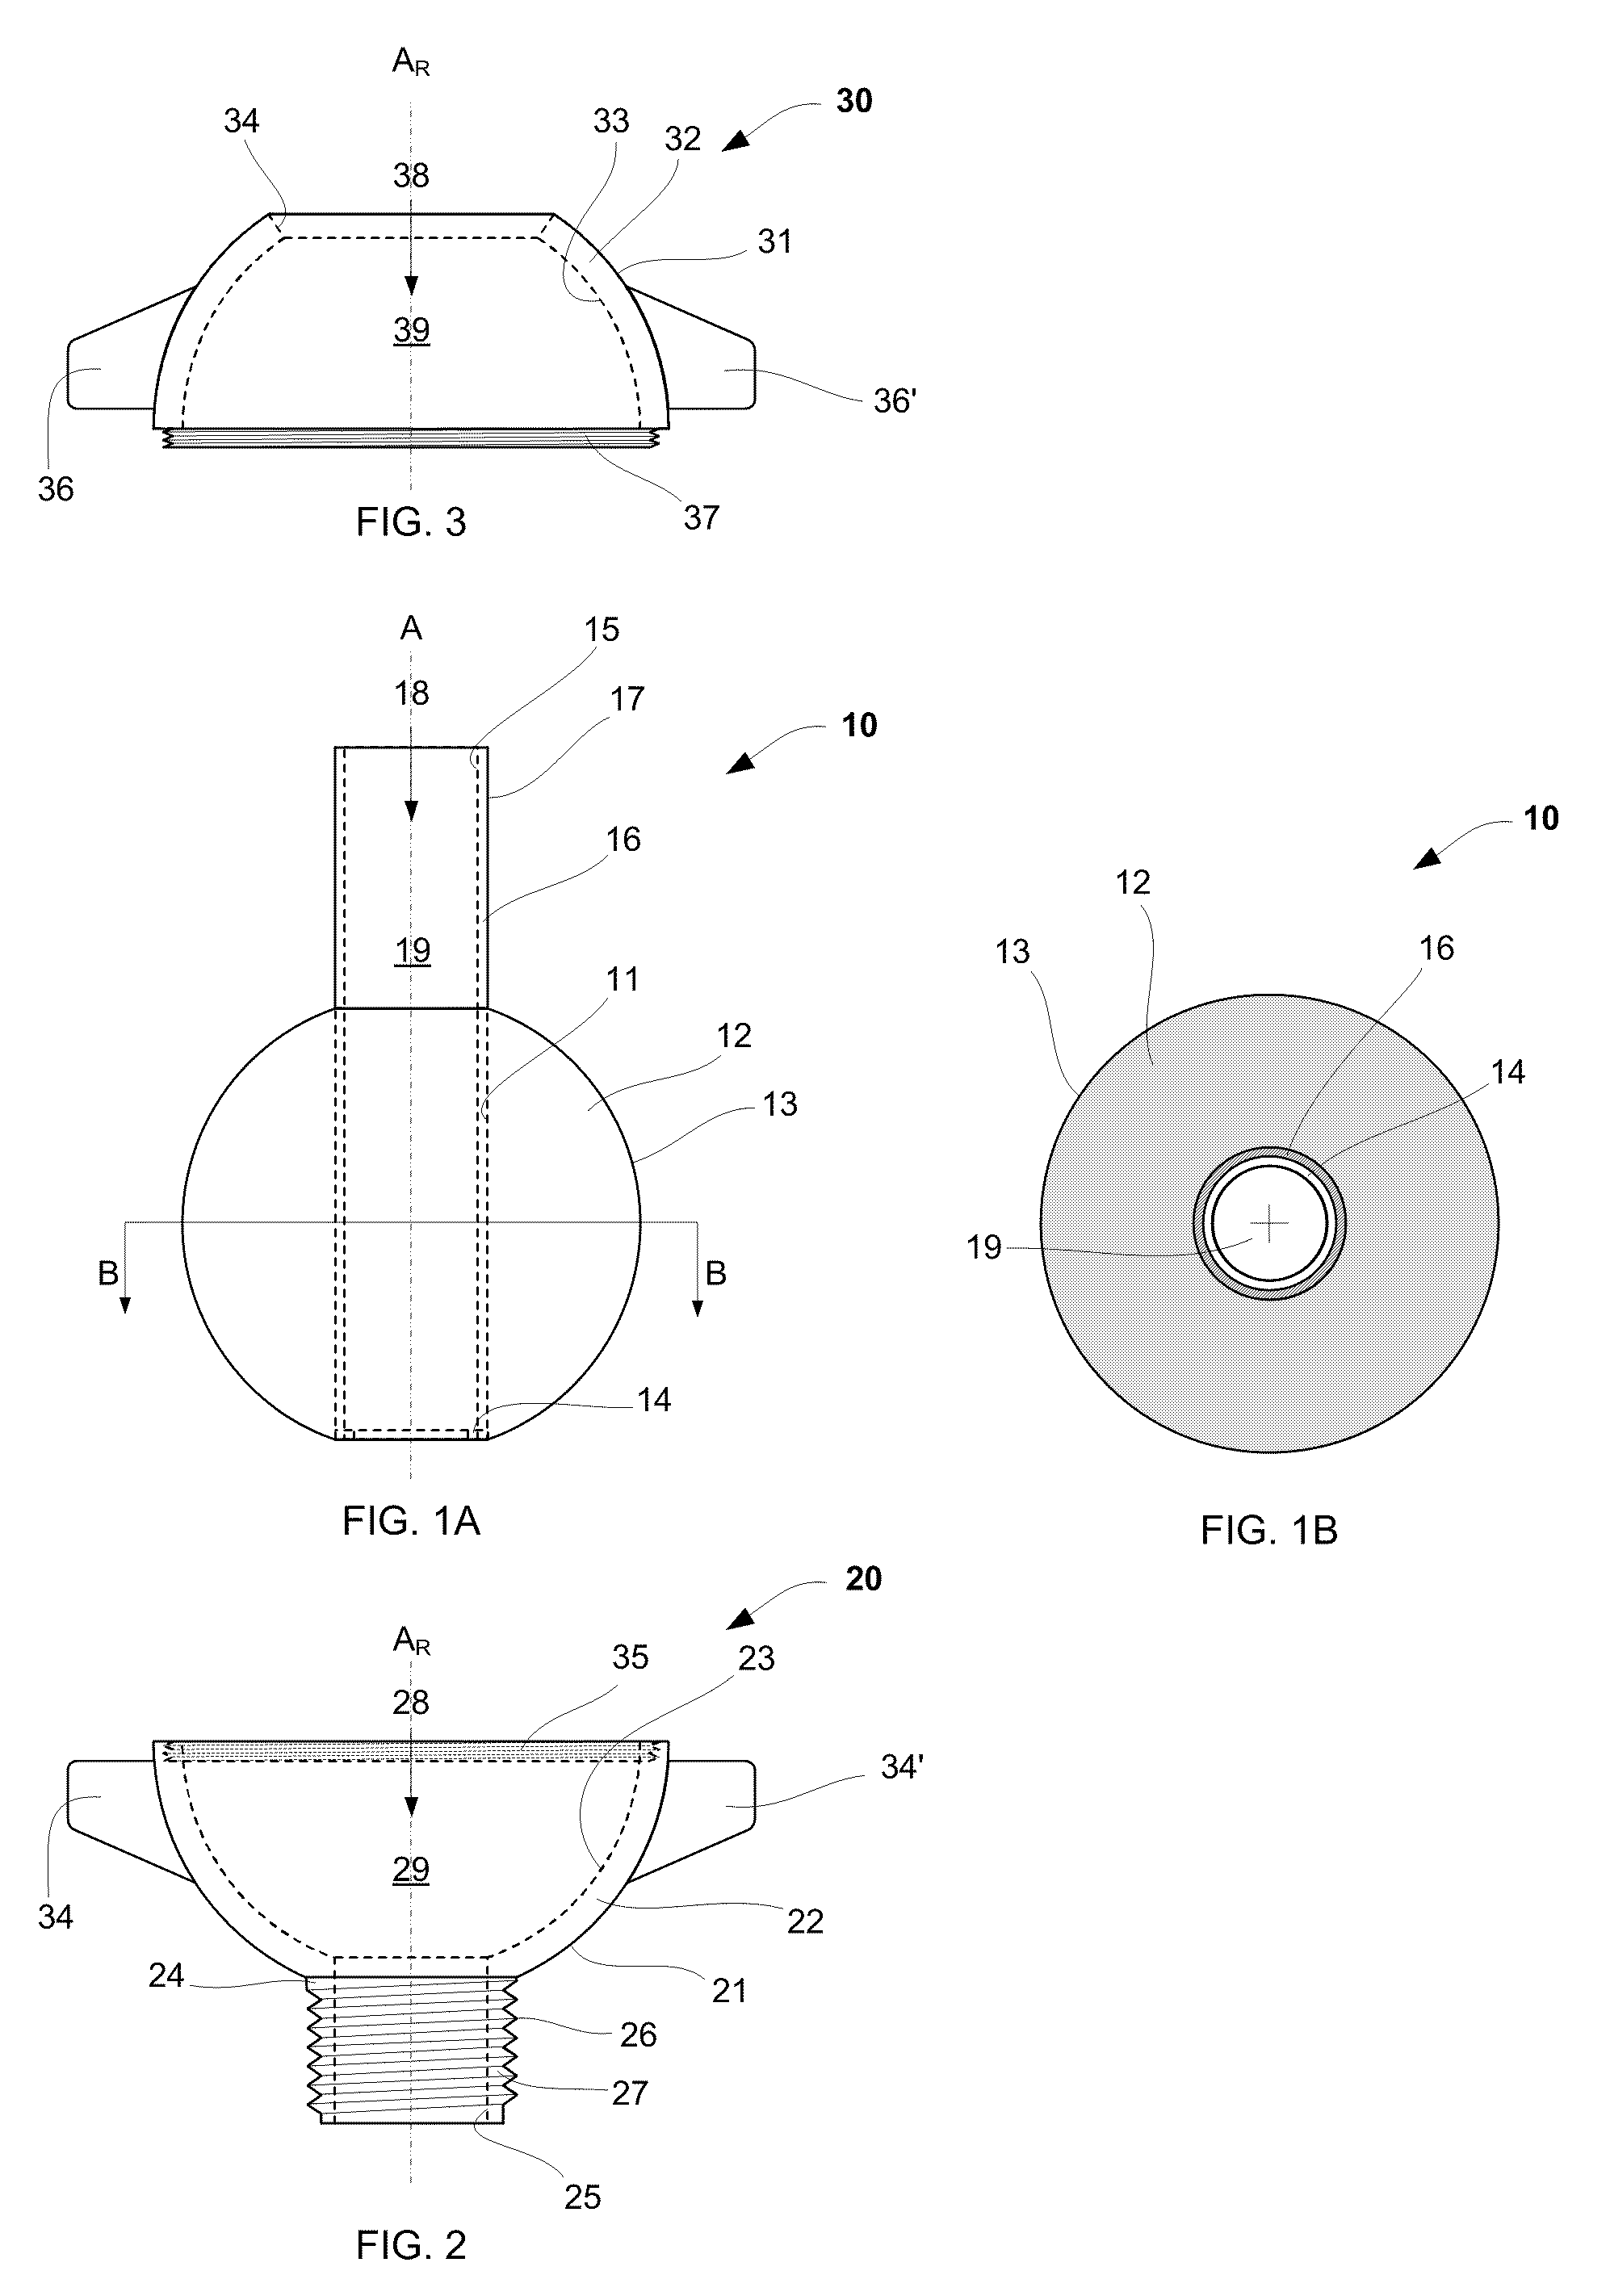 Method and apparatus for directed device placement in the cerebral ventricles or other intracranial targets